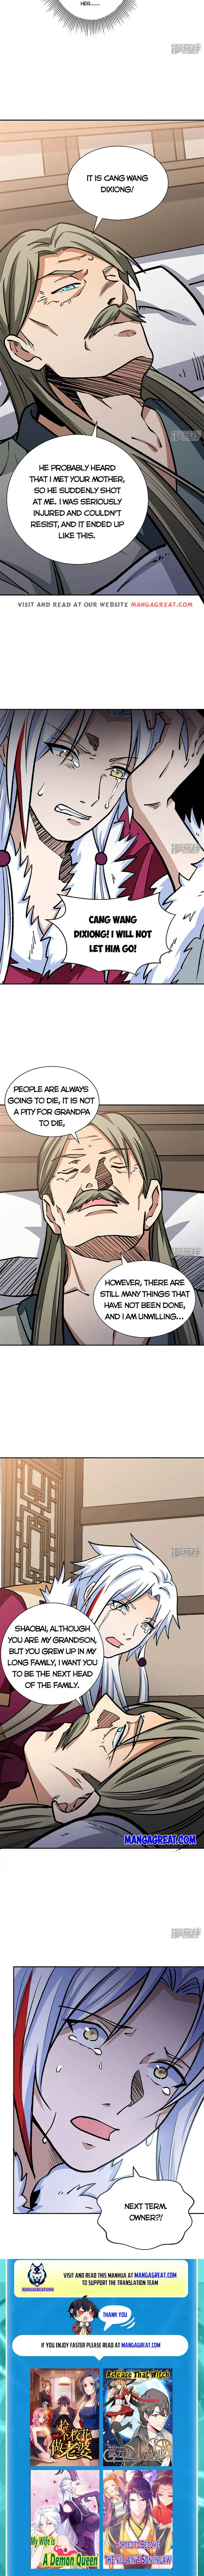 Martial Arts Reigns Chapter 530 page 9 - MangaWeebs.in